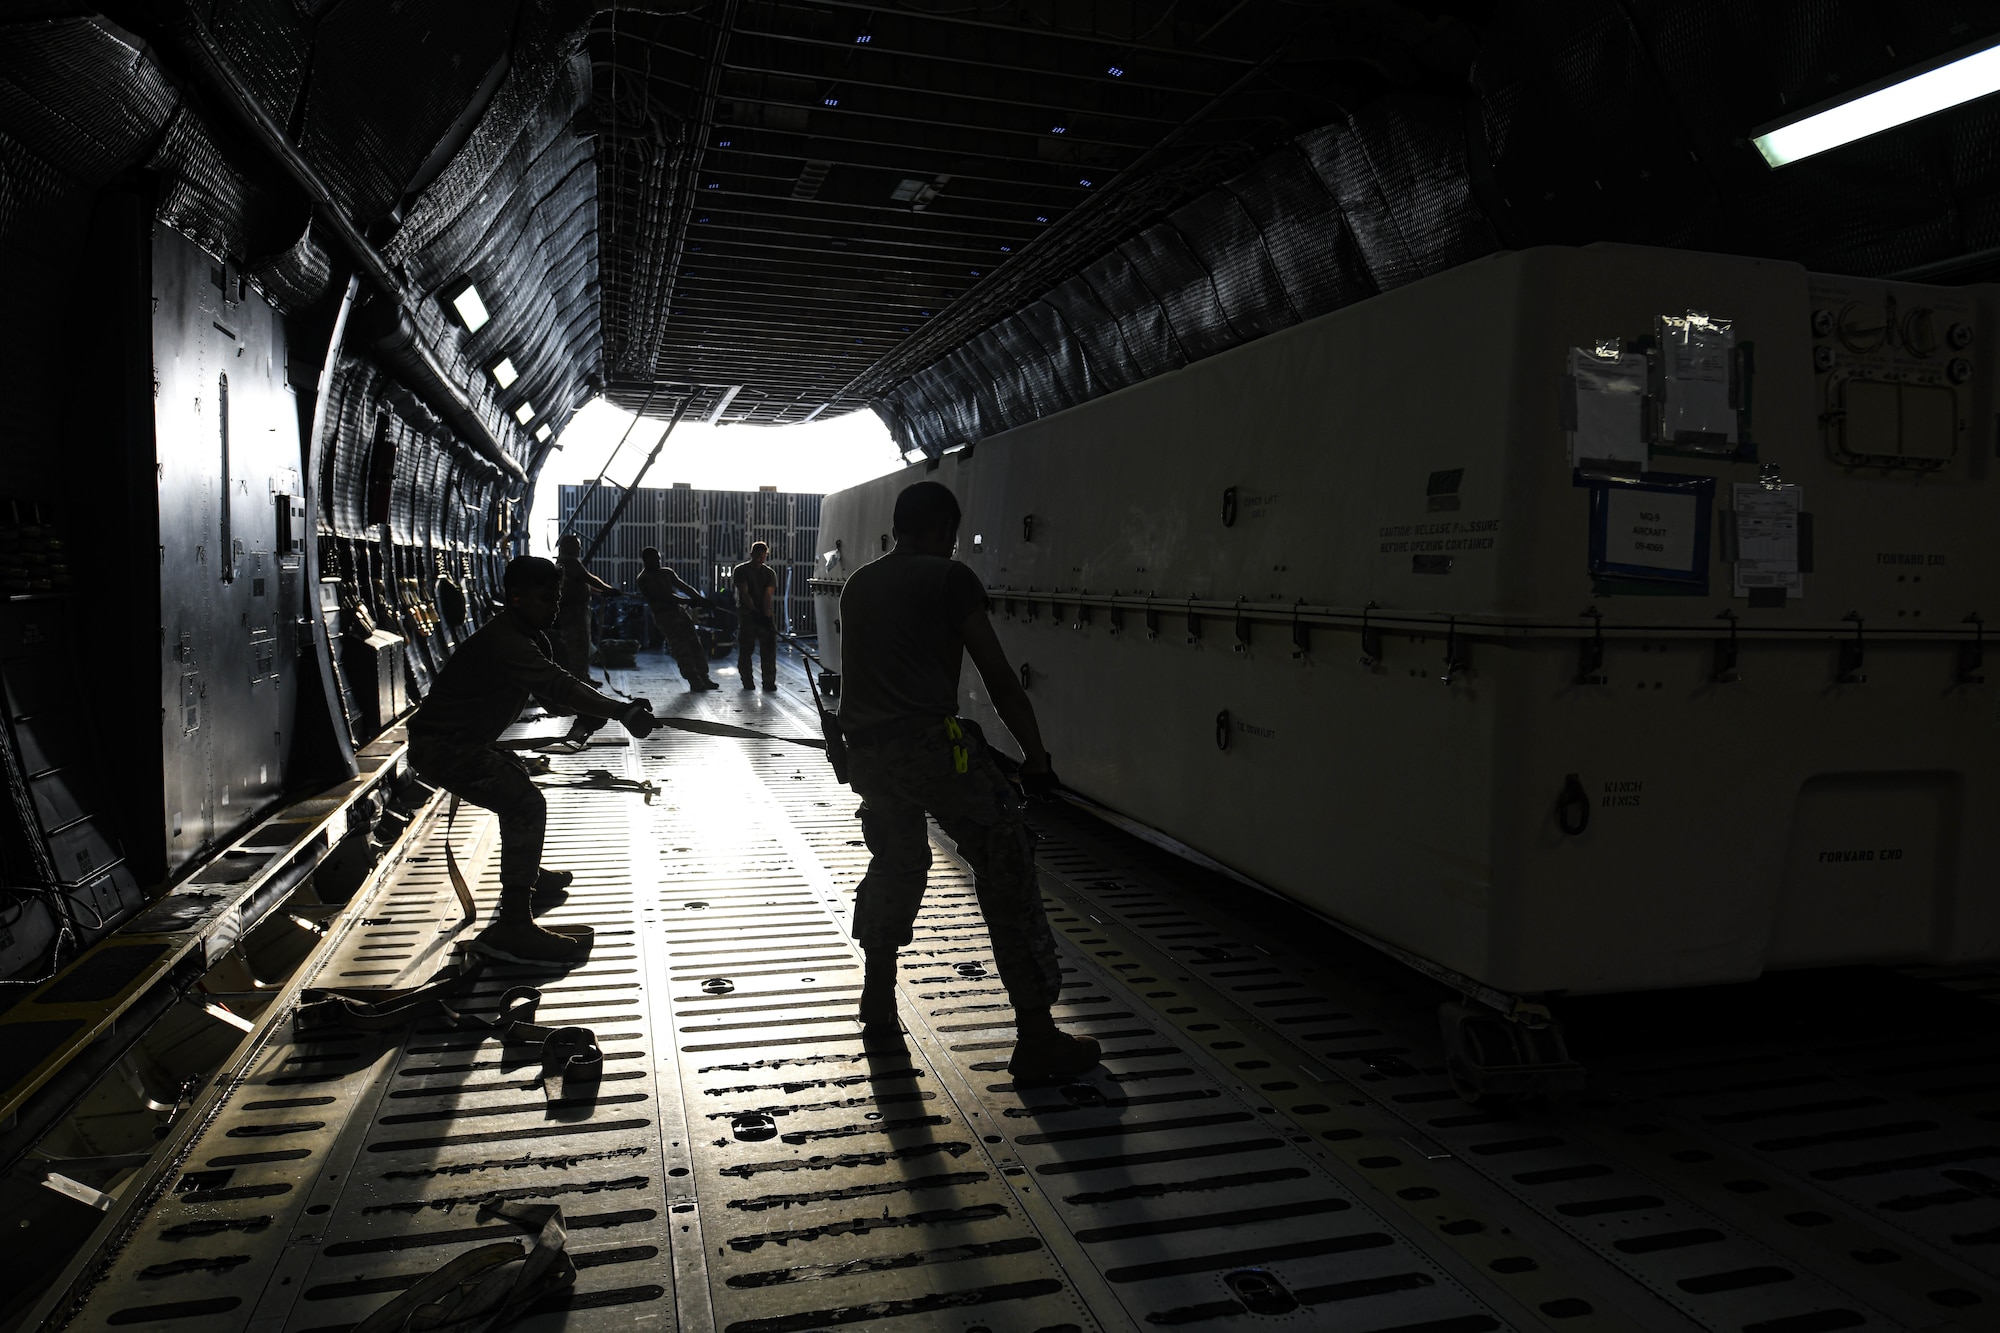 Four General Atomics MQ-9 Reaper drones were loaded onto a Lockheed C-5M Super Galaxy assigned to the 22nd Airlift Squadron, August 10, 2022, at Al Dhafra Air Base, United Arab Emirates. Since June, the 380th Air Expeditionary Wing has redeployed five Reaper drones back to the United States in exchange for nine replacements.